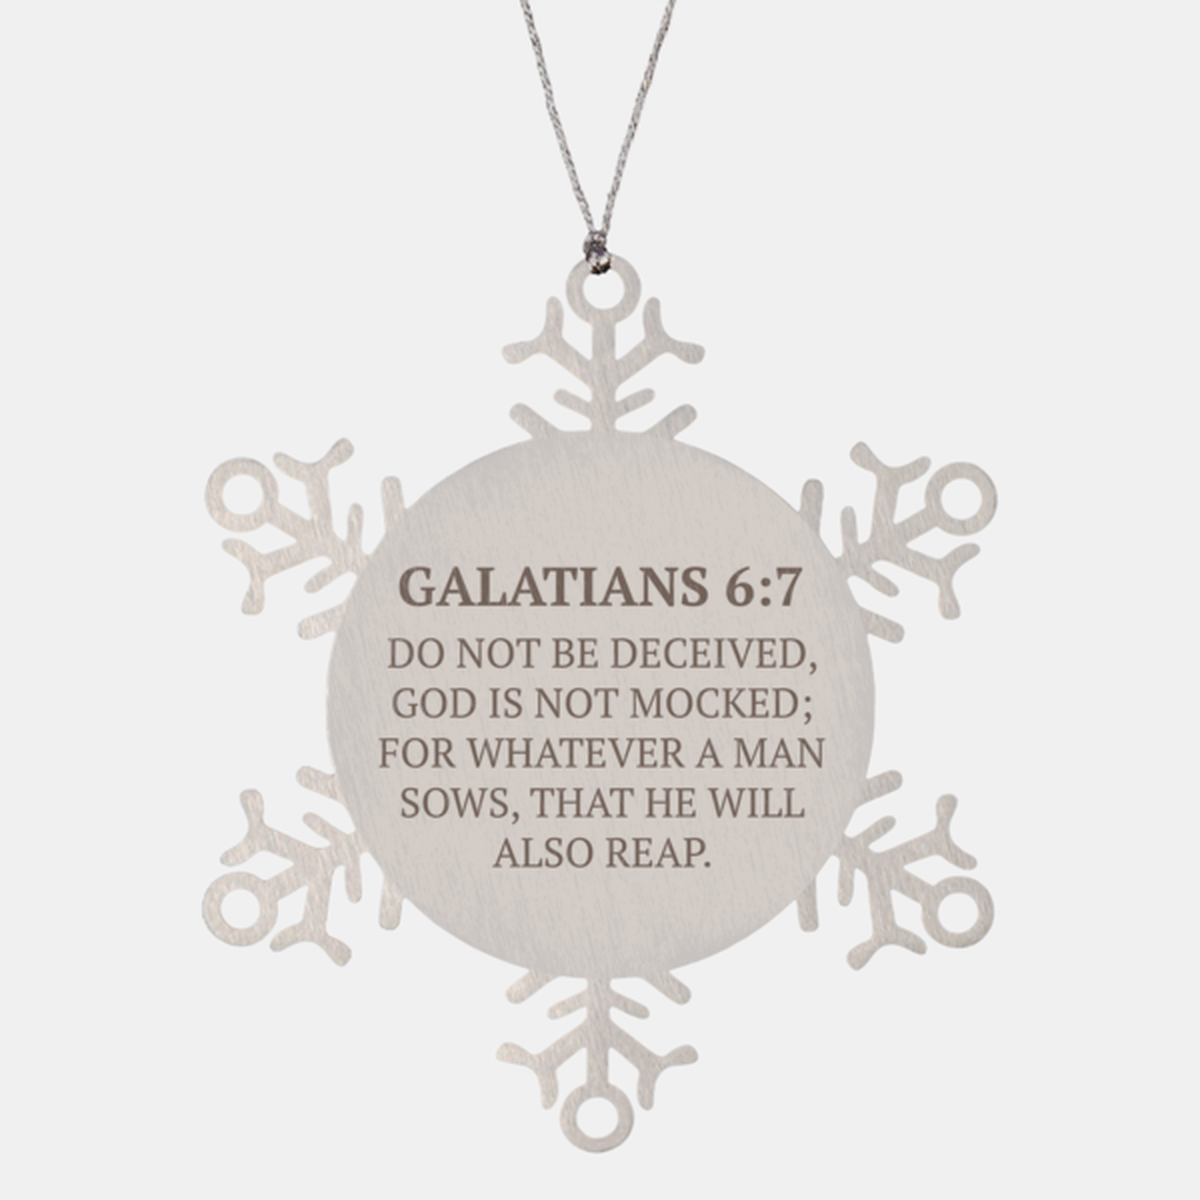 Christian Ornaments For Christmas Tree, Do Not Be Deceived, God Is Not Mocked, Religious Christmas Decorations, Scripture Ornaments Gifts, Bible Verse Ornament